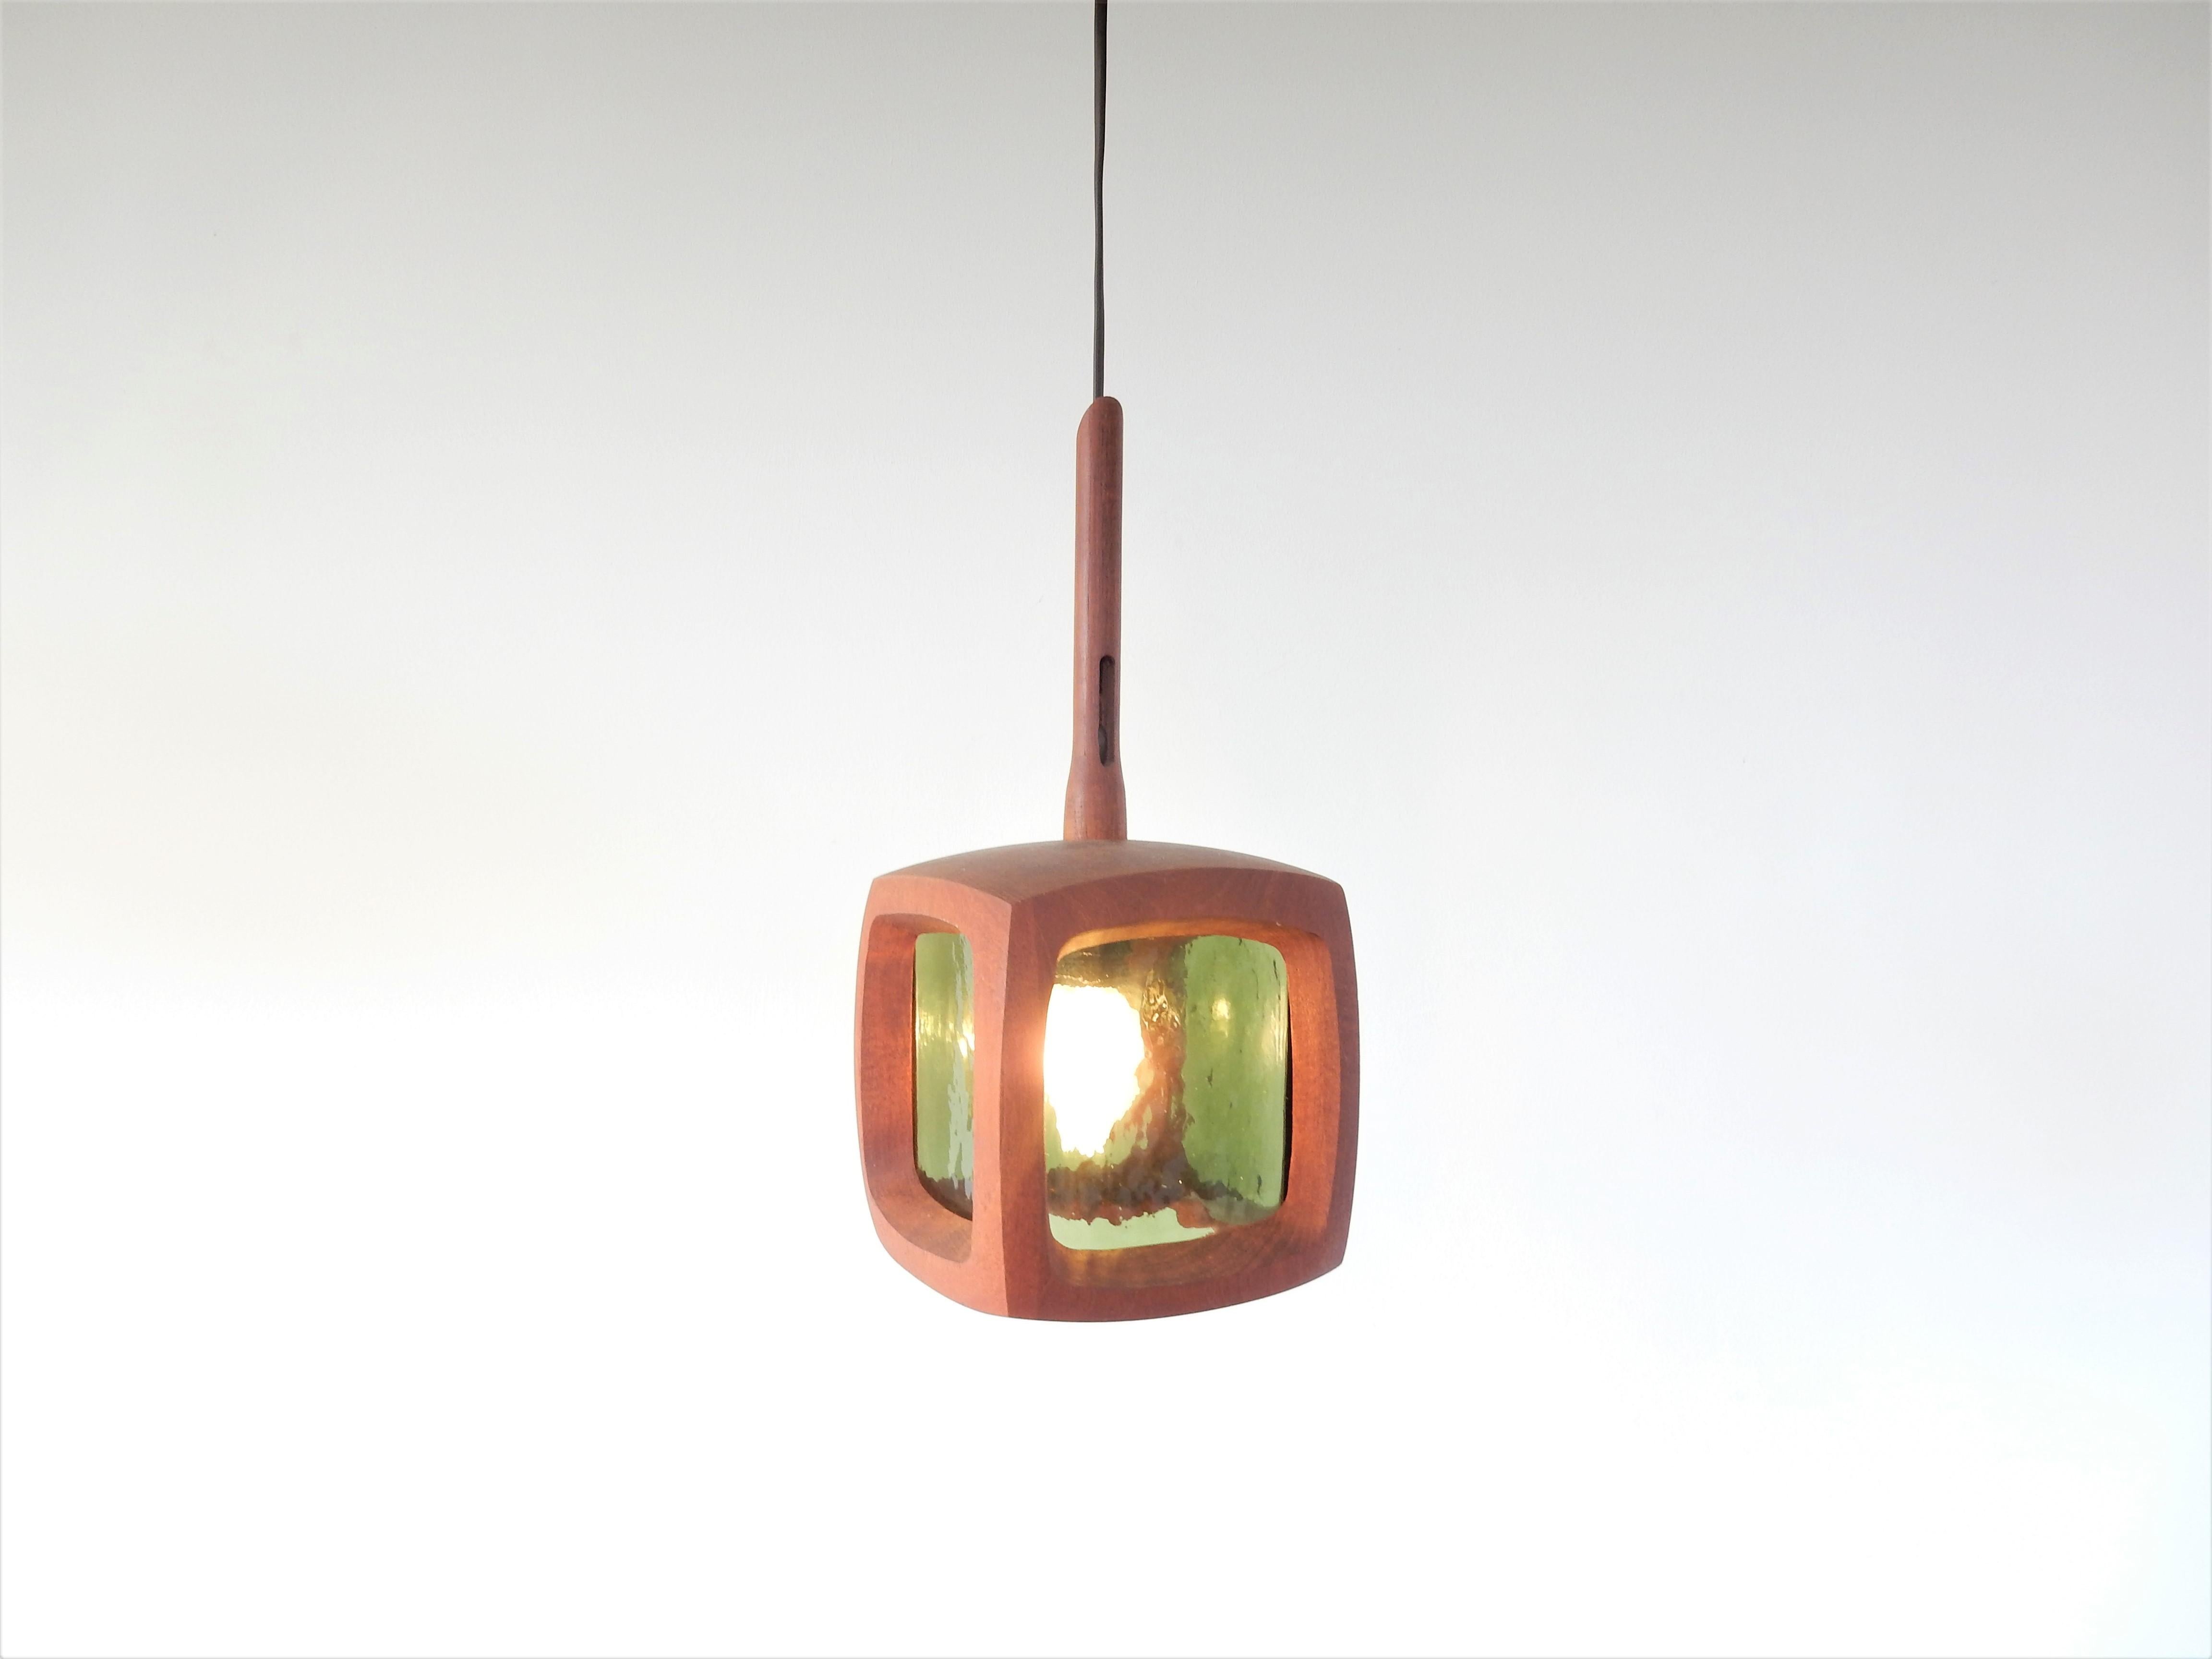 This stunning and not often seen pendant lamp is made in the 1960s-1970s. It is a nicely square shaped lamp made of teak wood and green glass. The lamp is in a very good condition with minor signs of age and use. The shape and material of this piece